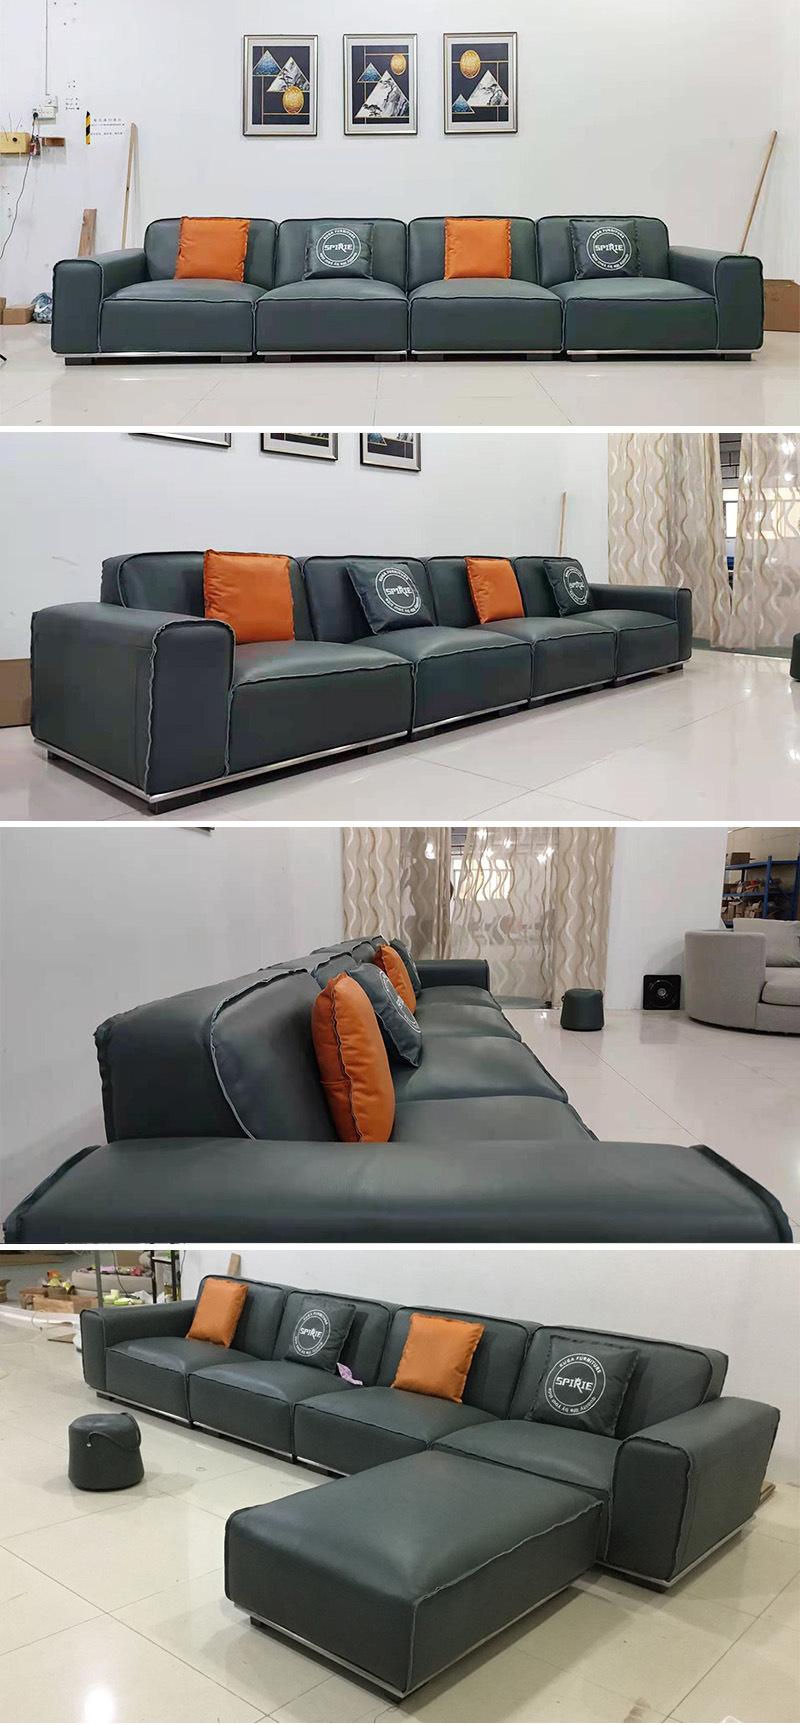 Modern Fabric Sofa Contemporary Couch Leisure Home Leather Sofa for Living Room Furniture Set 2827